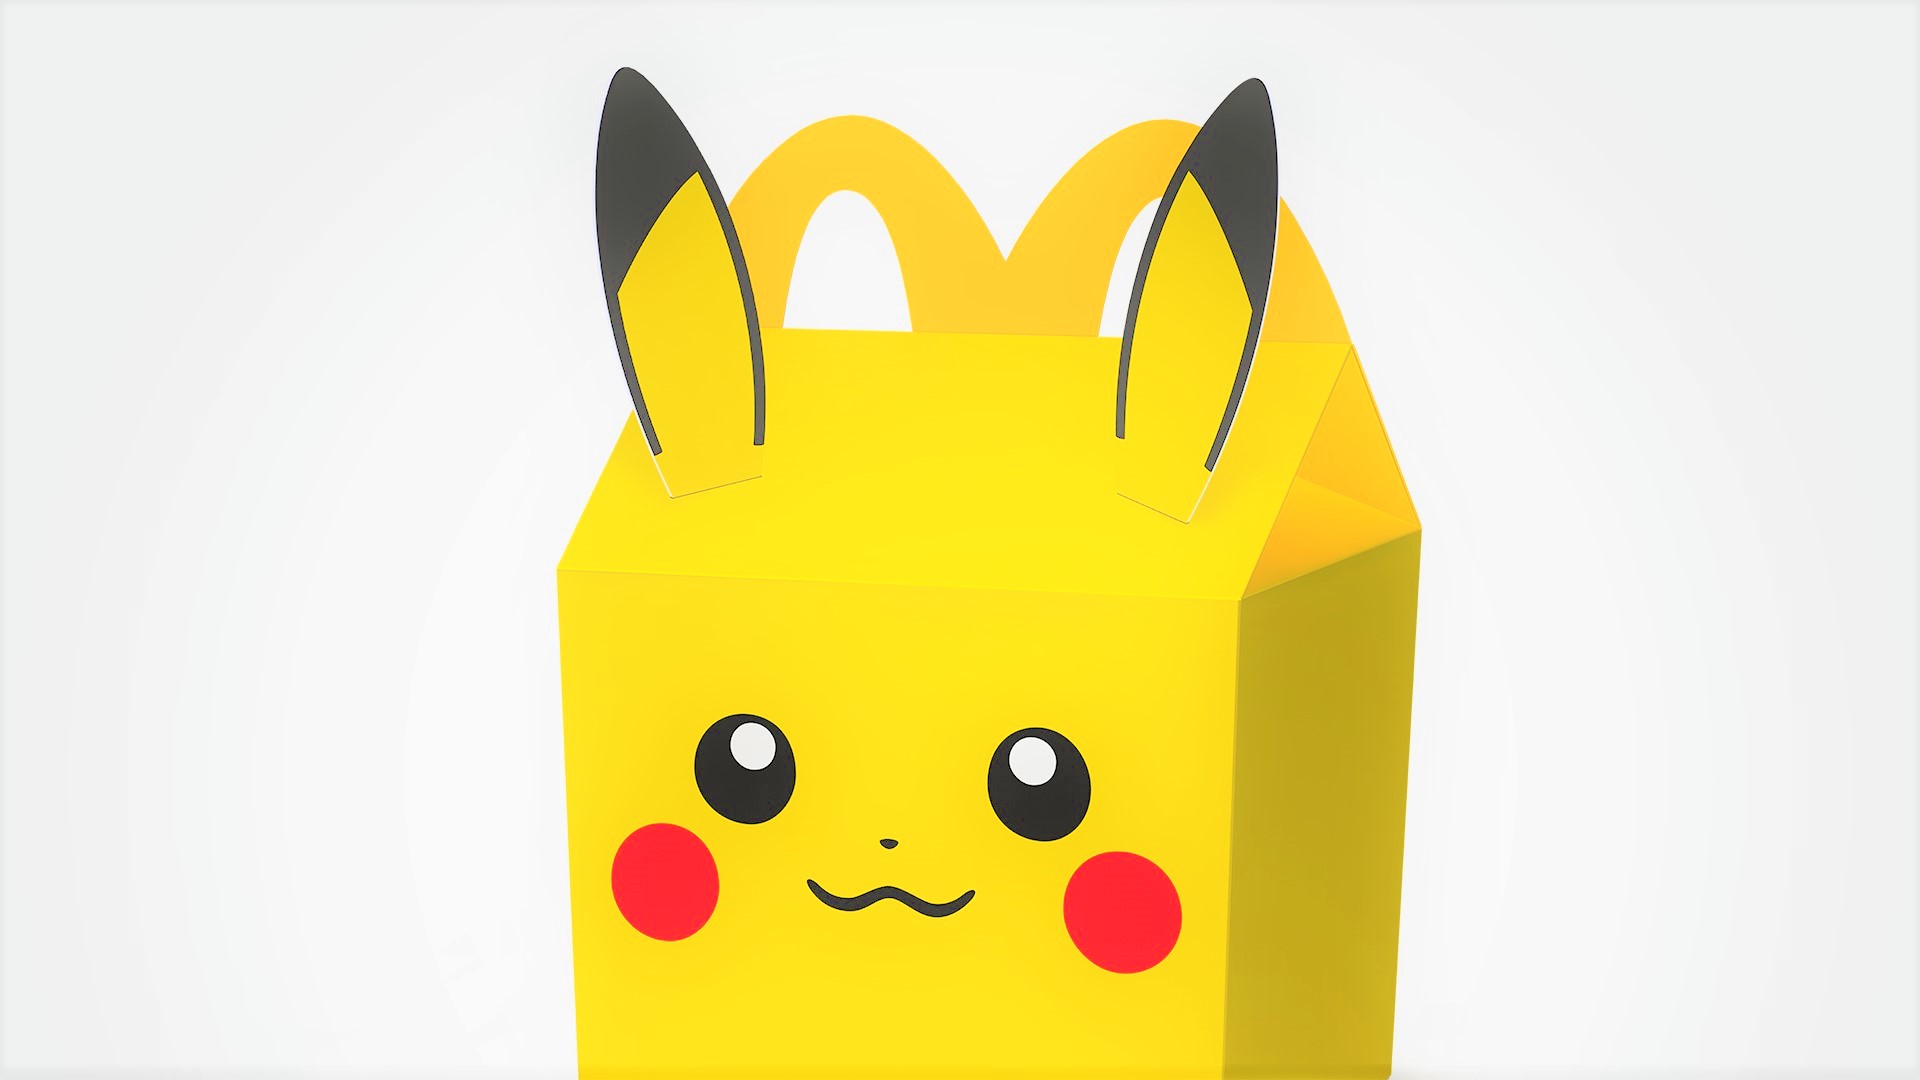 You can once again get Pokémon cards in McDonalds Happy Meals